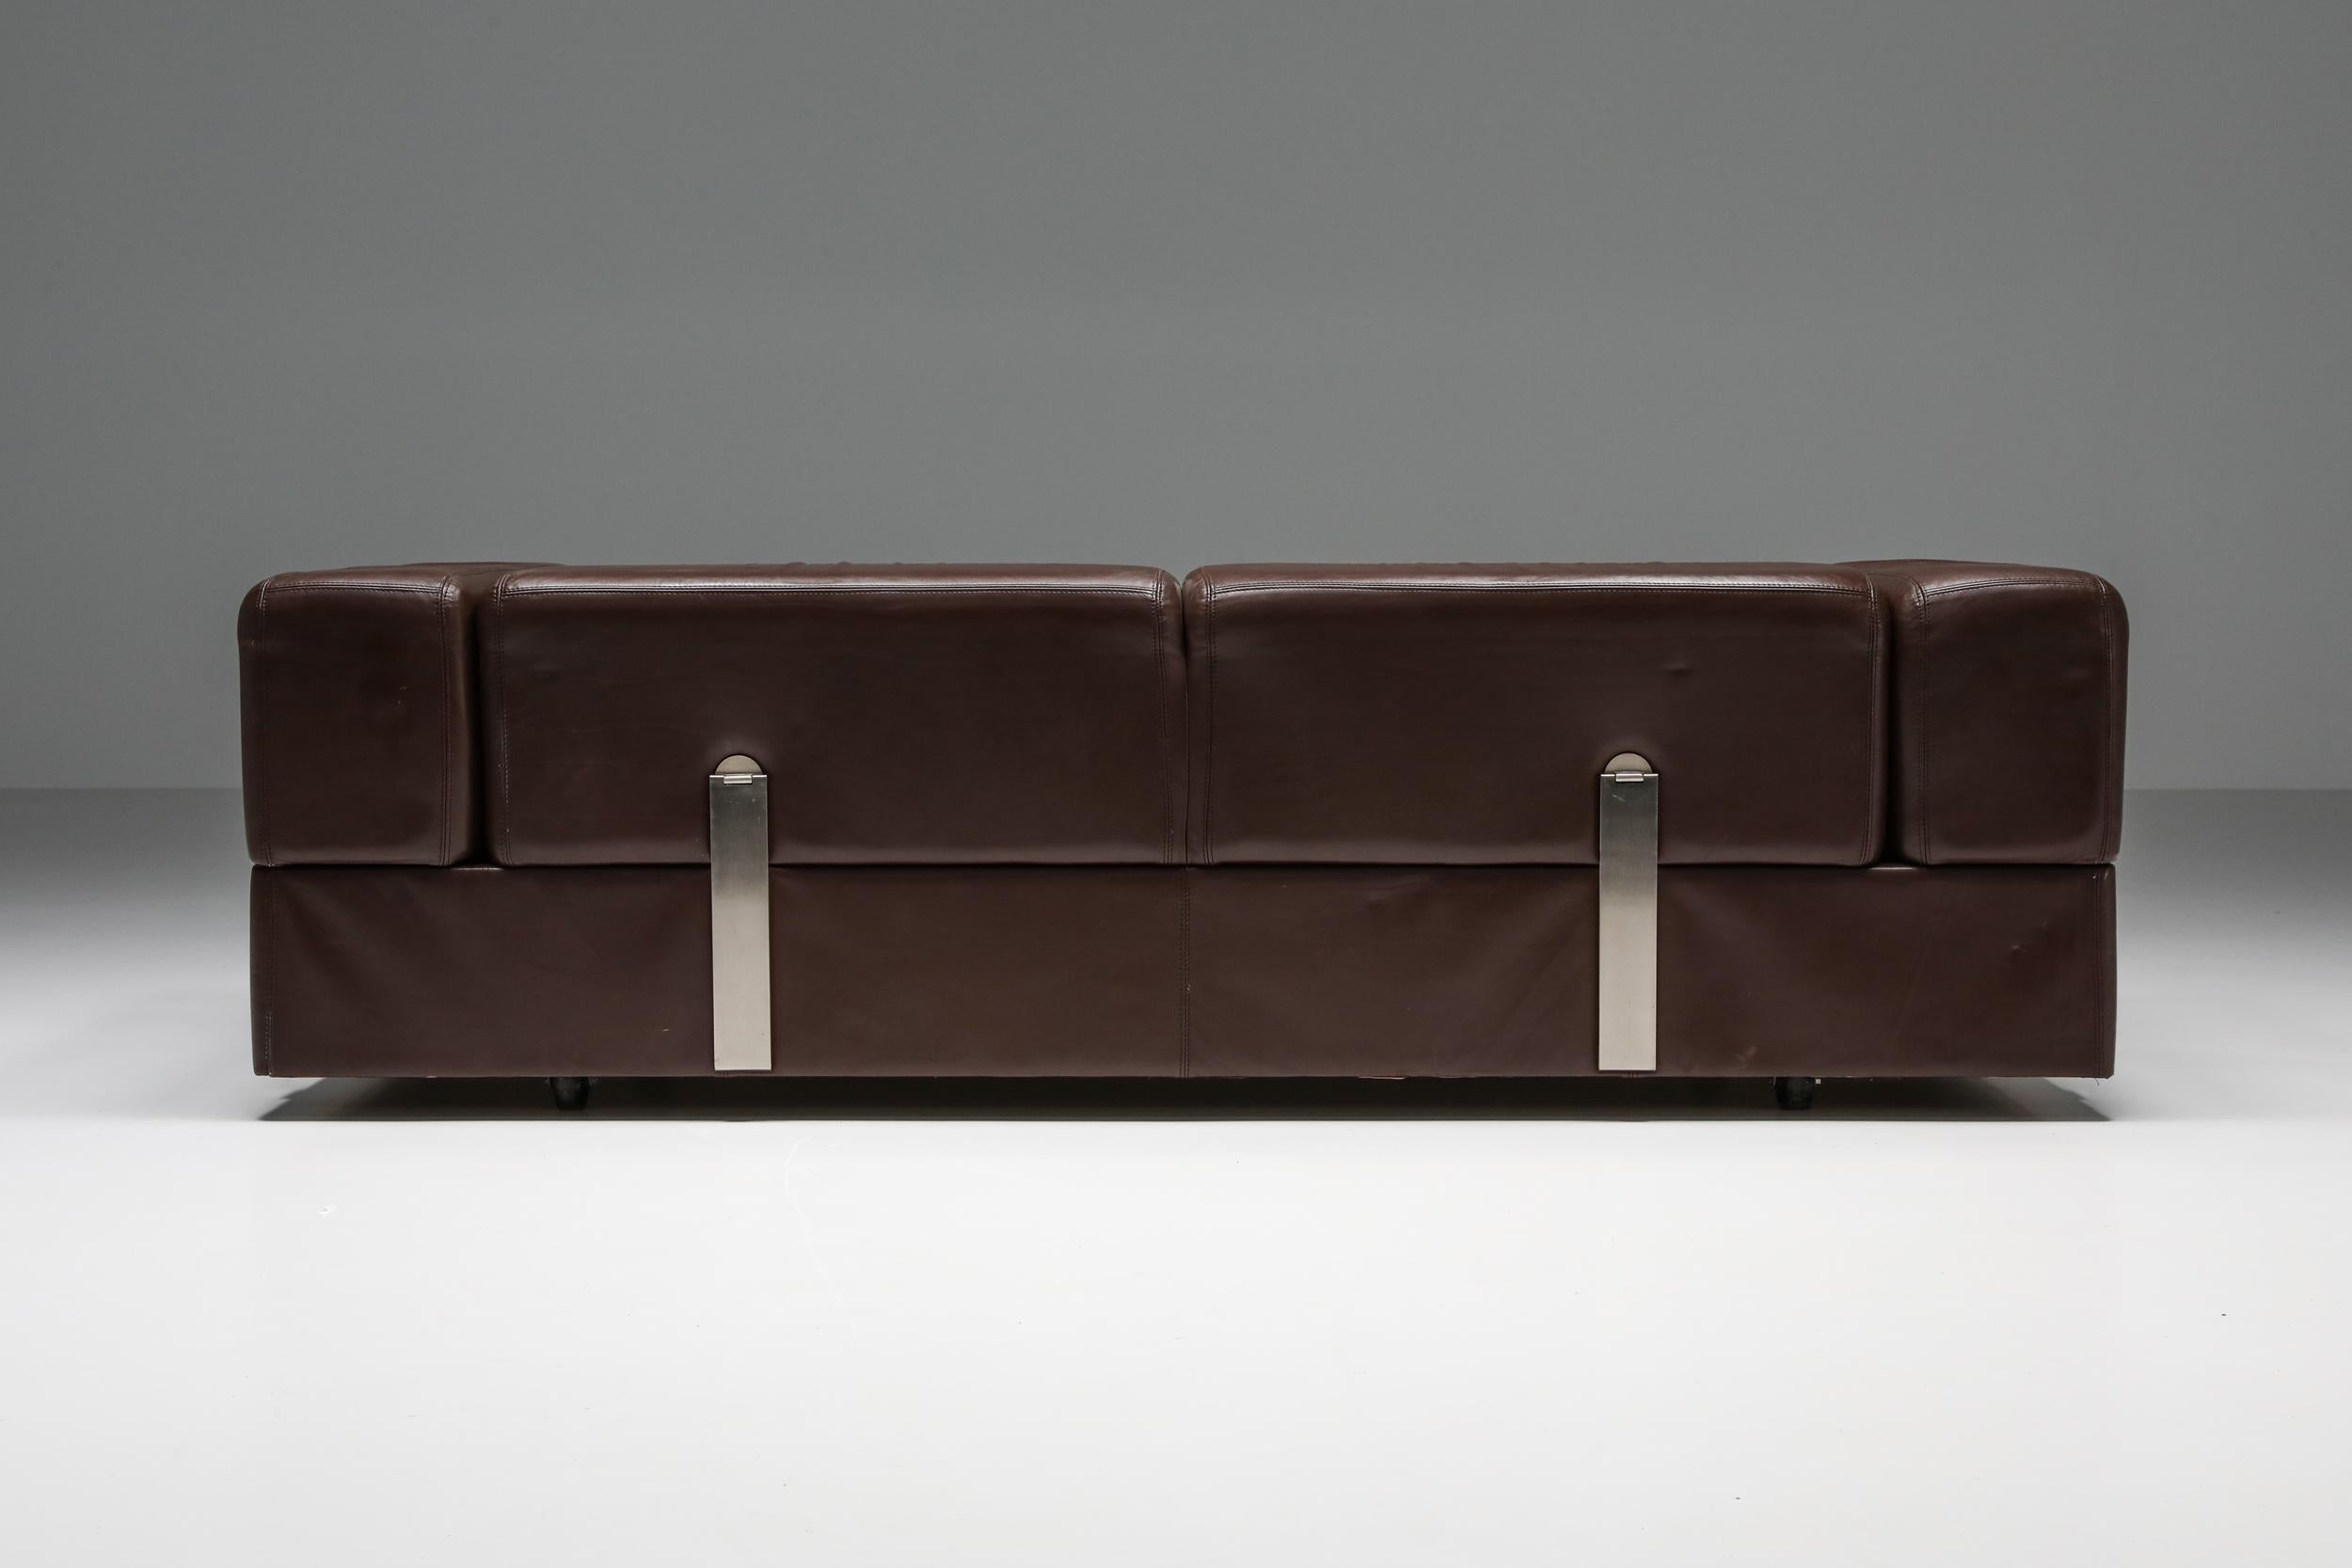 Post-Modern Daybed Sofa 711 by Tito Agnoli for Cinova in Brown Leather, 1960 For Sale 5